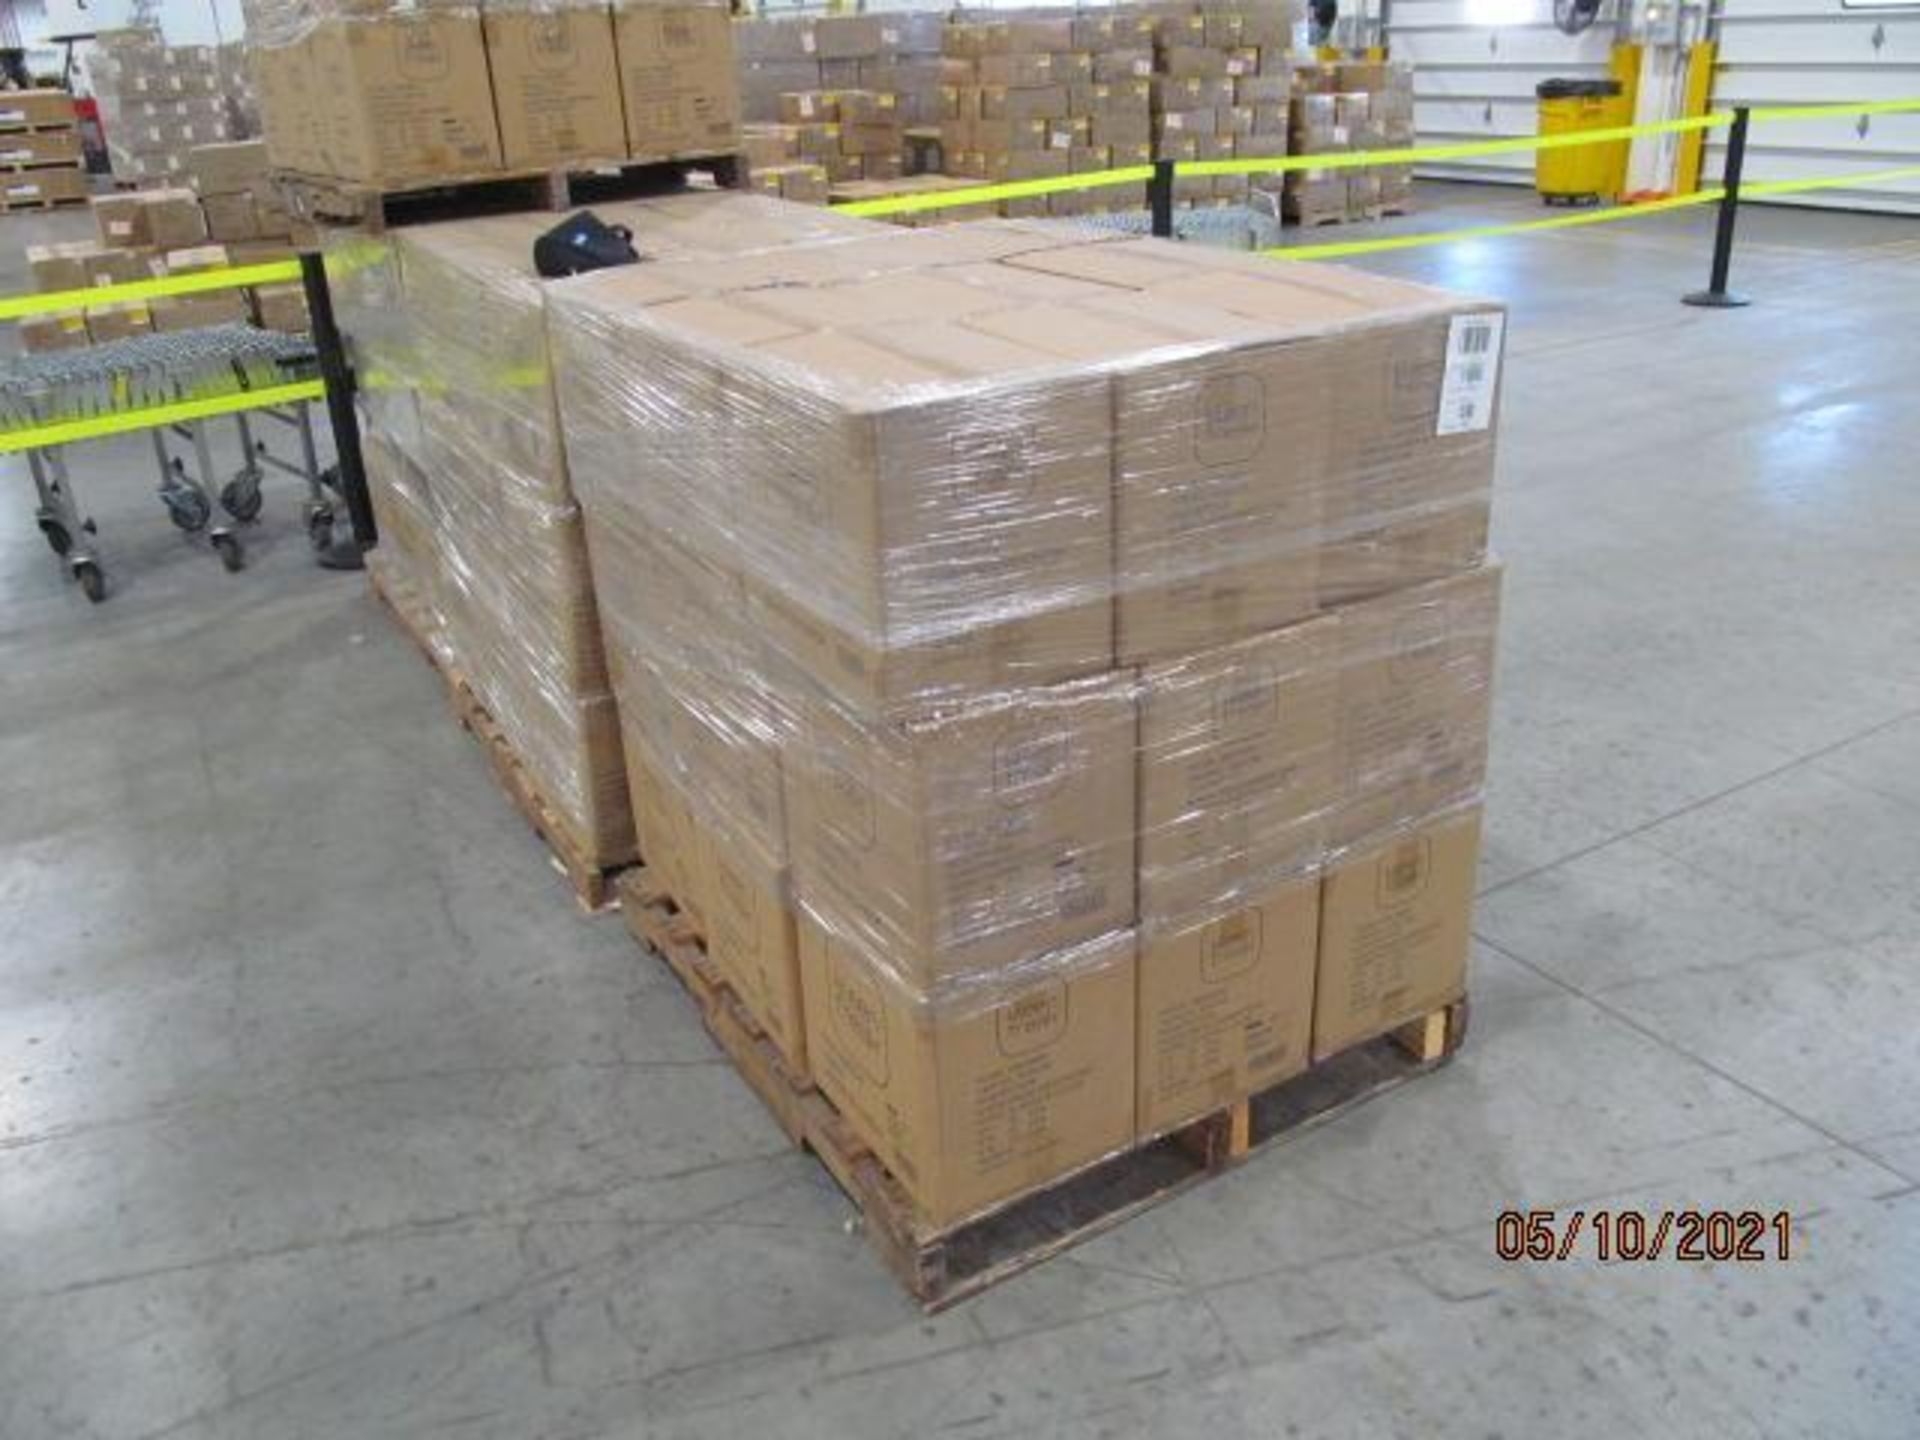 Lot of Waxman Kleen Freak Sanitizing Wipes consisting of 29,027 packages on 45 pallets. Each package - Image 7 of 11